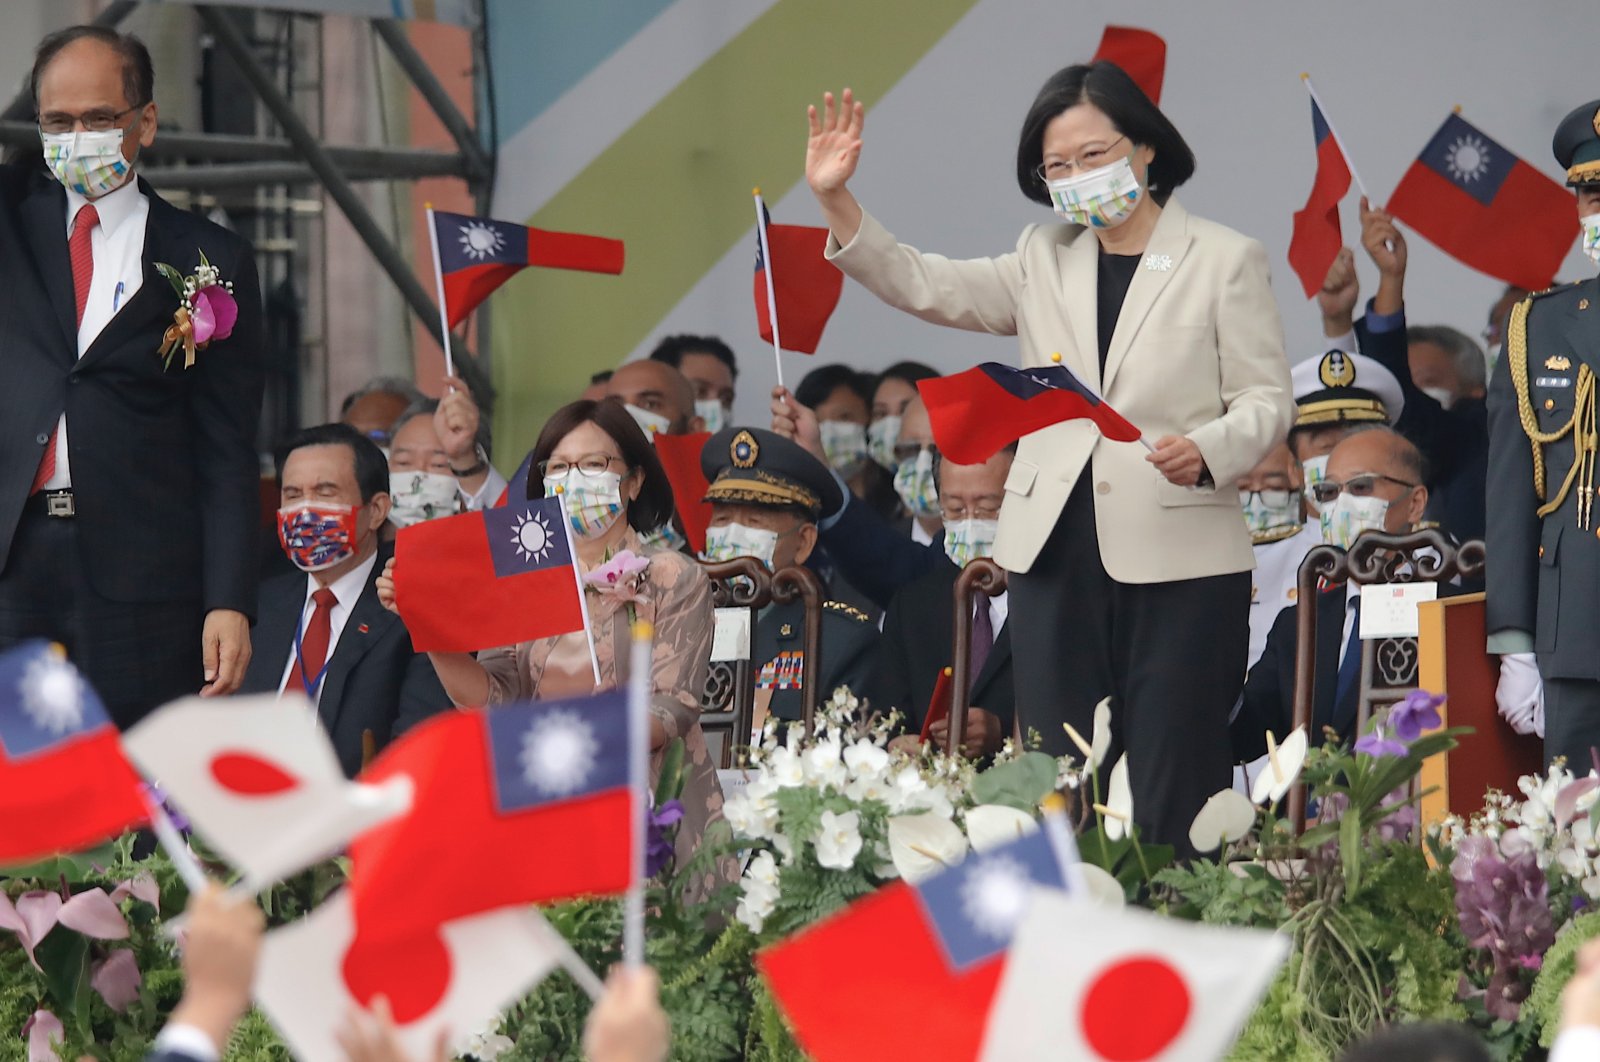 Taiwanese President Tsai Ing-wen holds a Taiwanese flag as she reacts to members of a Japanese delegation taking part in a parade during Taiwan&#039;s National Day celebrations outside the Presidential Palace, Taipei, Taiwan, Oct. 10 2022. (EPA Photo)